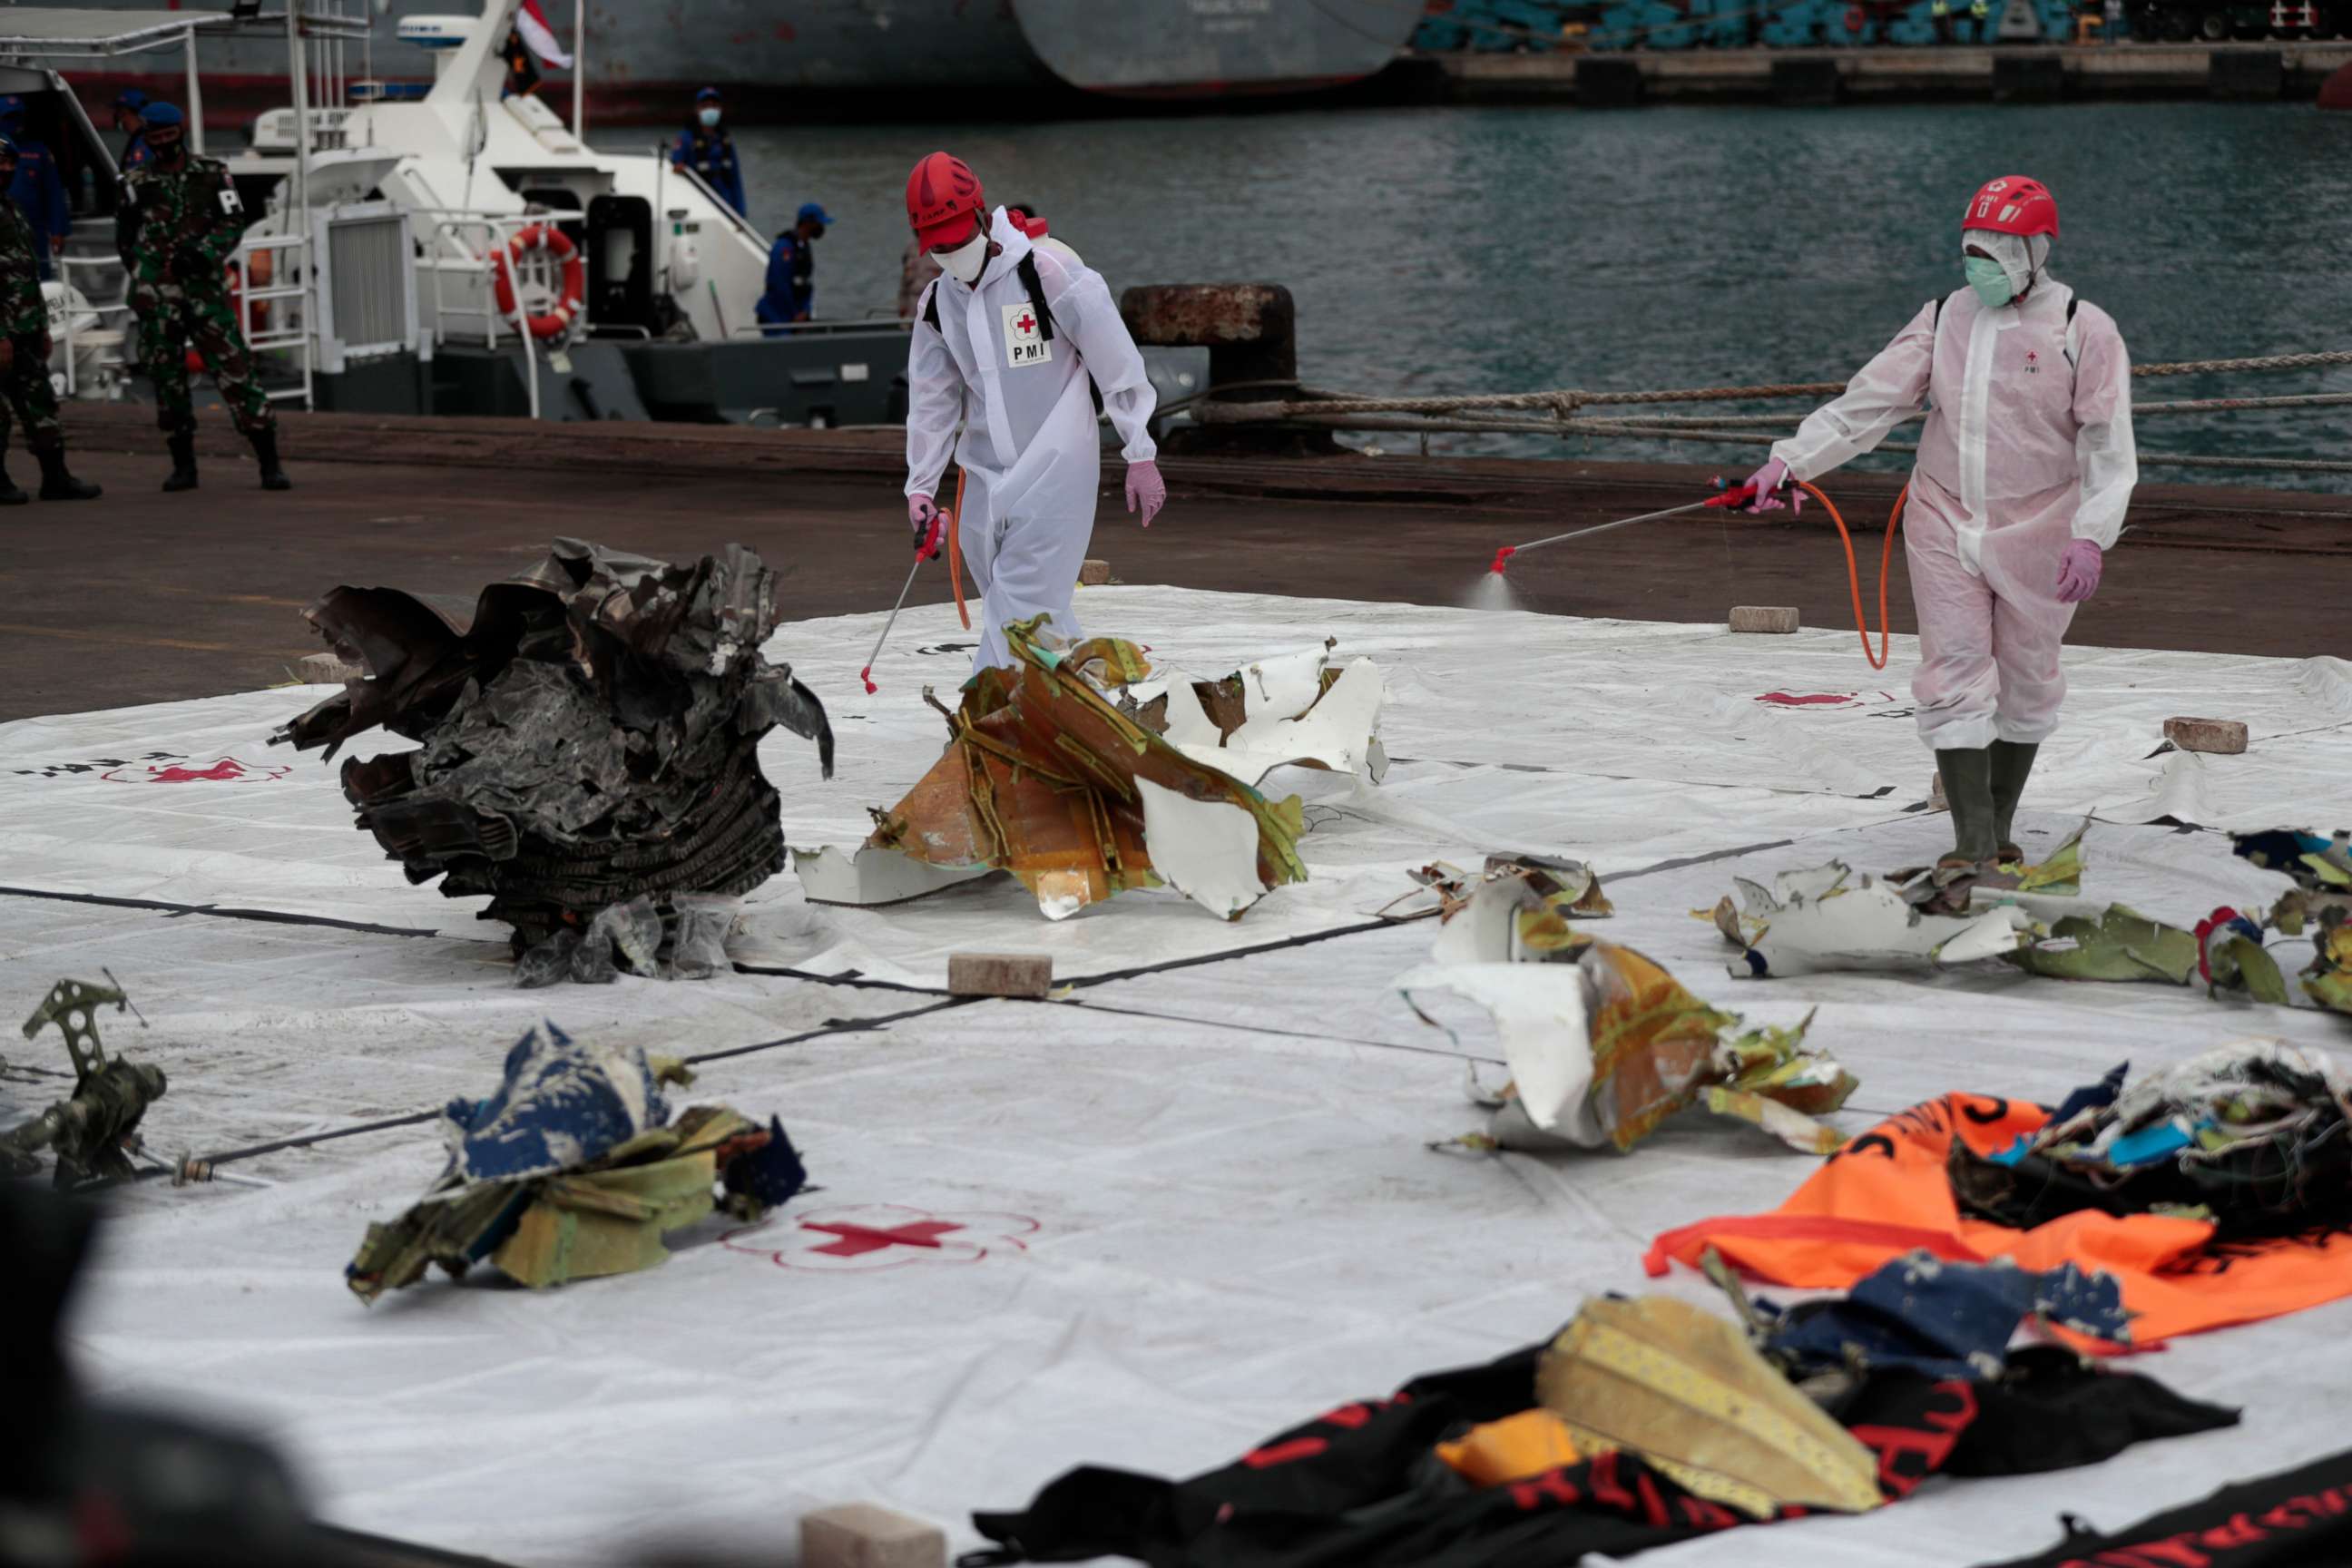 PHOTO: Workers spray disinfectant at parts of aircraft recovered from Java Sea where a Sriwijaya Air passenger jet crashed, at Tanjung Priok Port in Jakarta, Indonesia, Jan. 11, 2021.